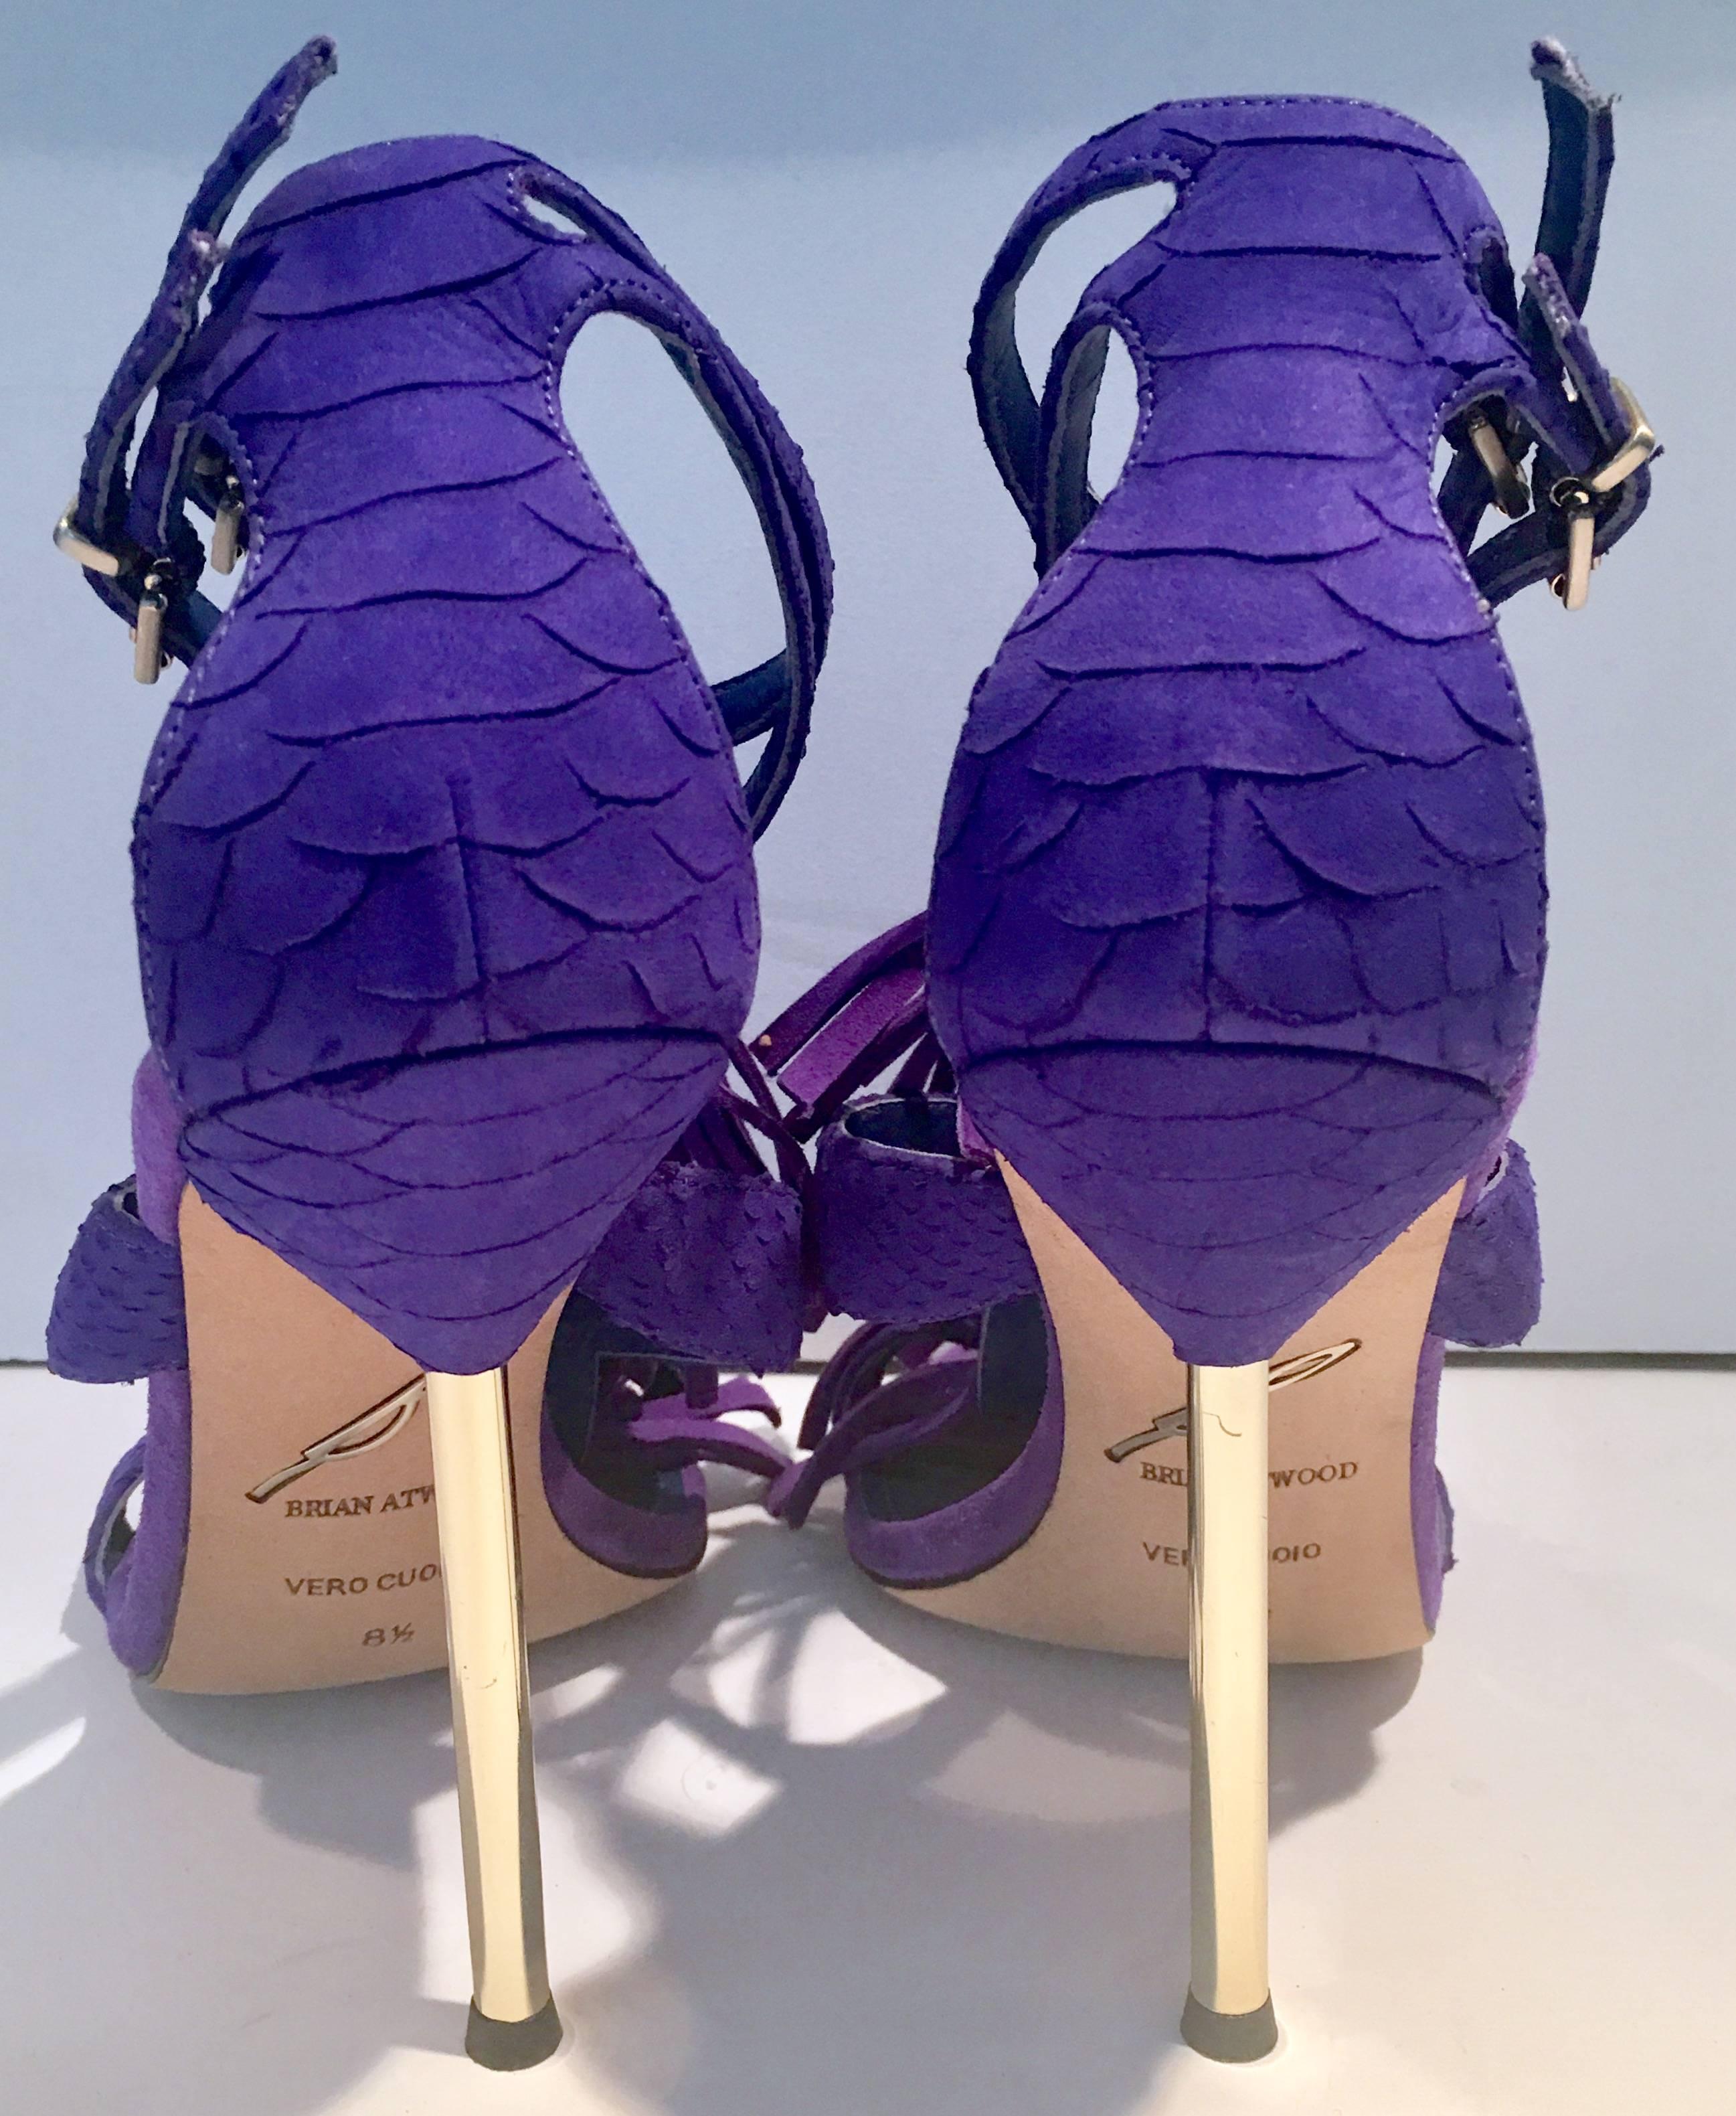 Purple Brian Atwood Suede Fringe & Gold Heel Stiletto Shoes New 8.5